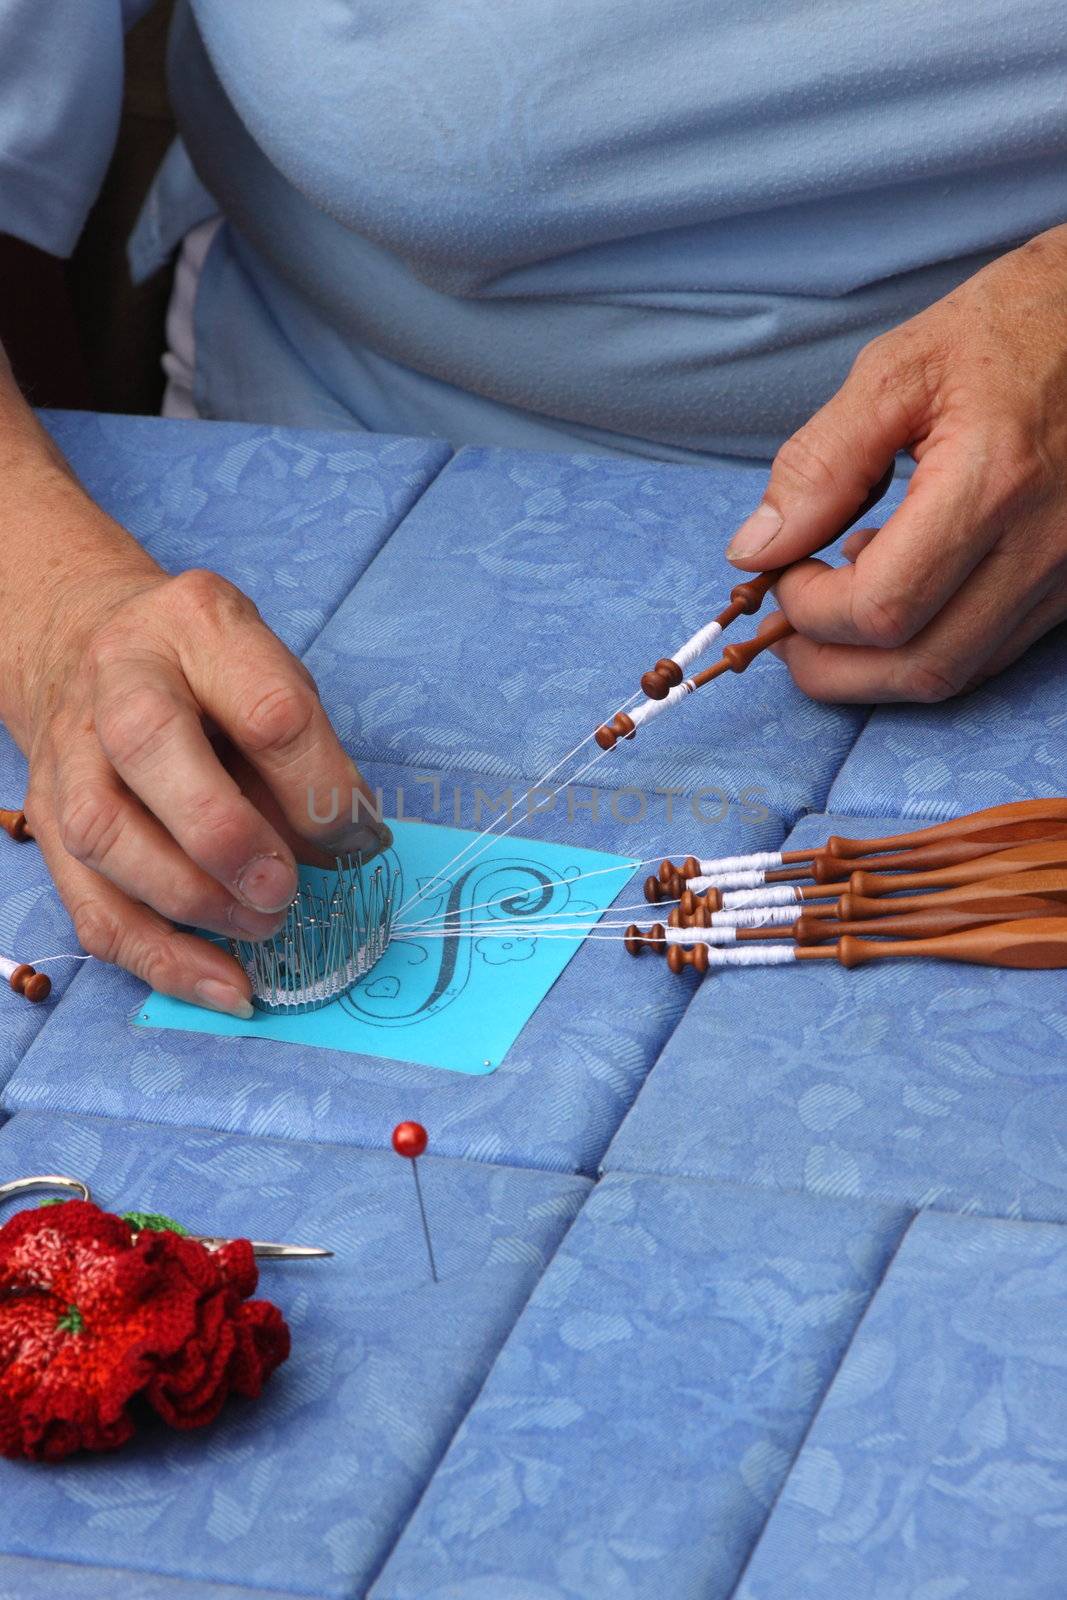 Process of lace-making with bobbins  by jp_chretien